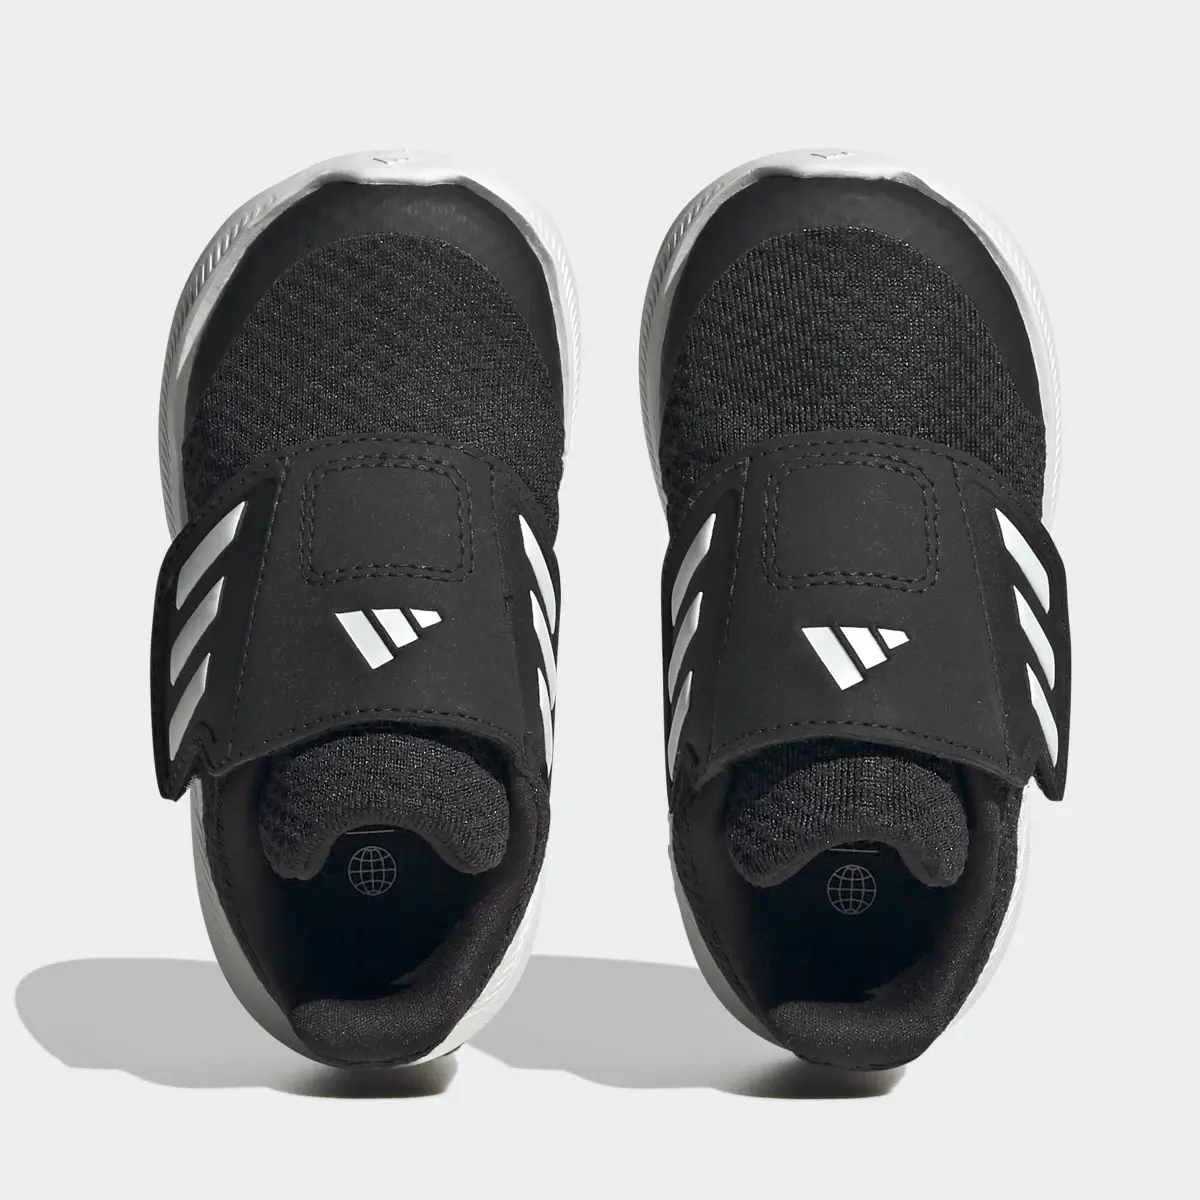 Adidas Runfalcon 3.0 Sport Running Hook-and-Loop Shoes. 3